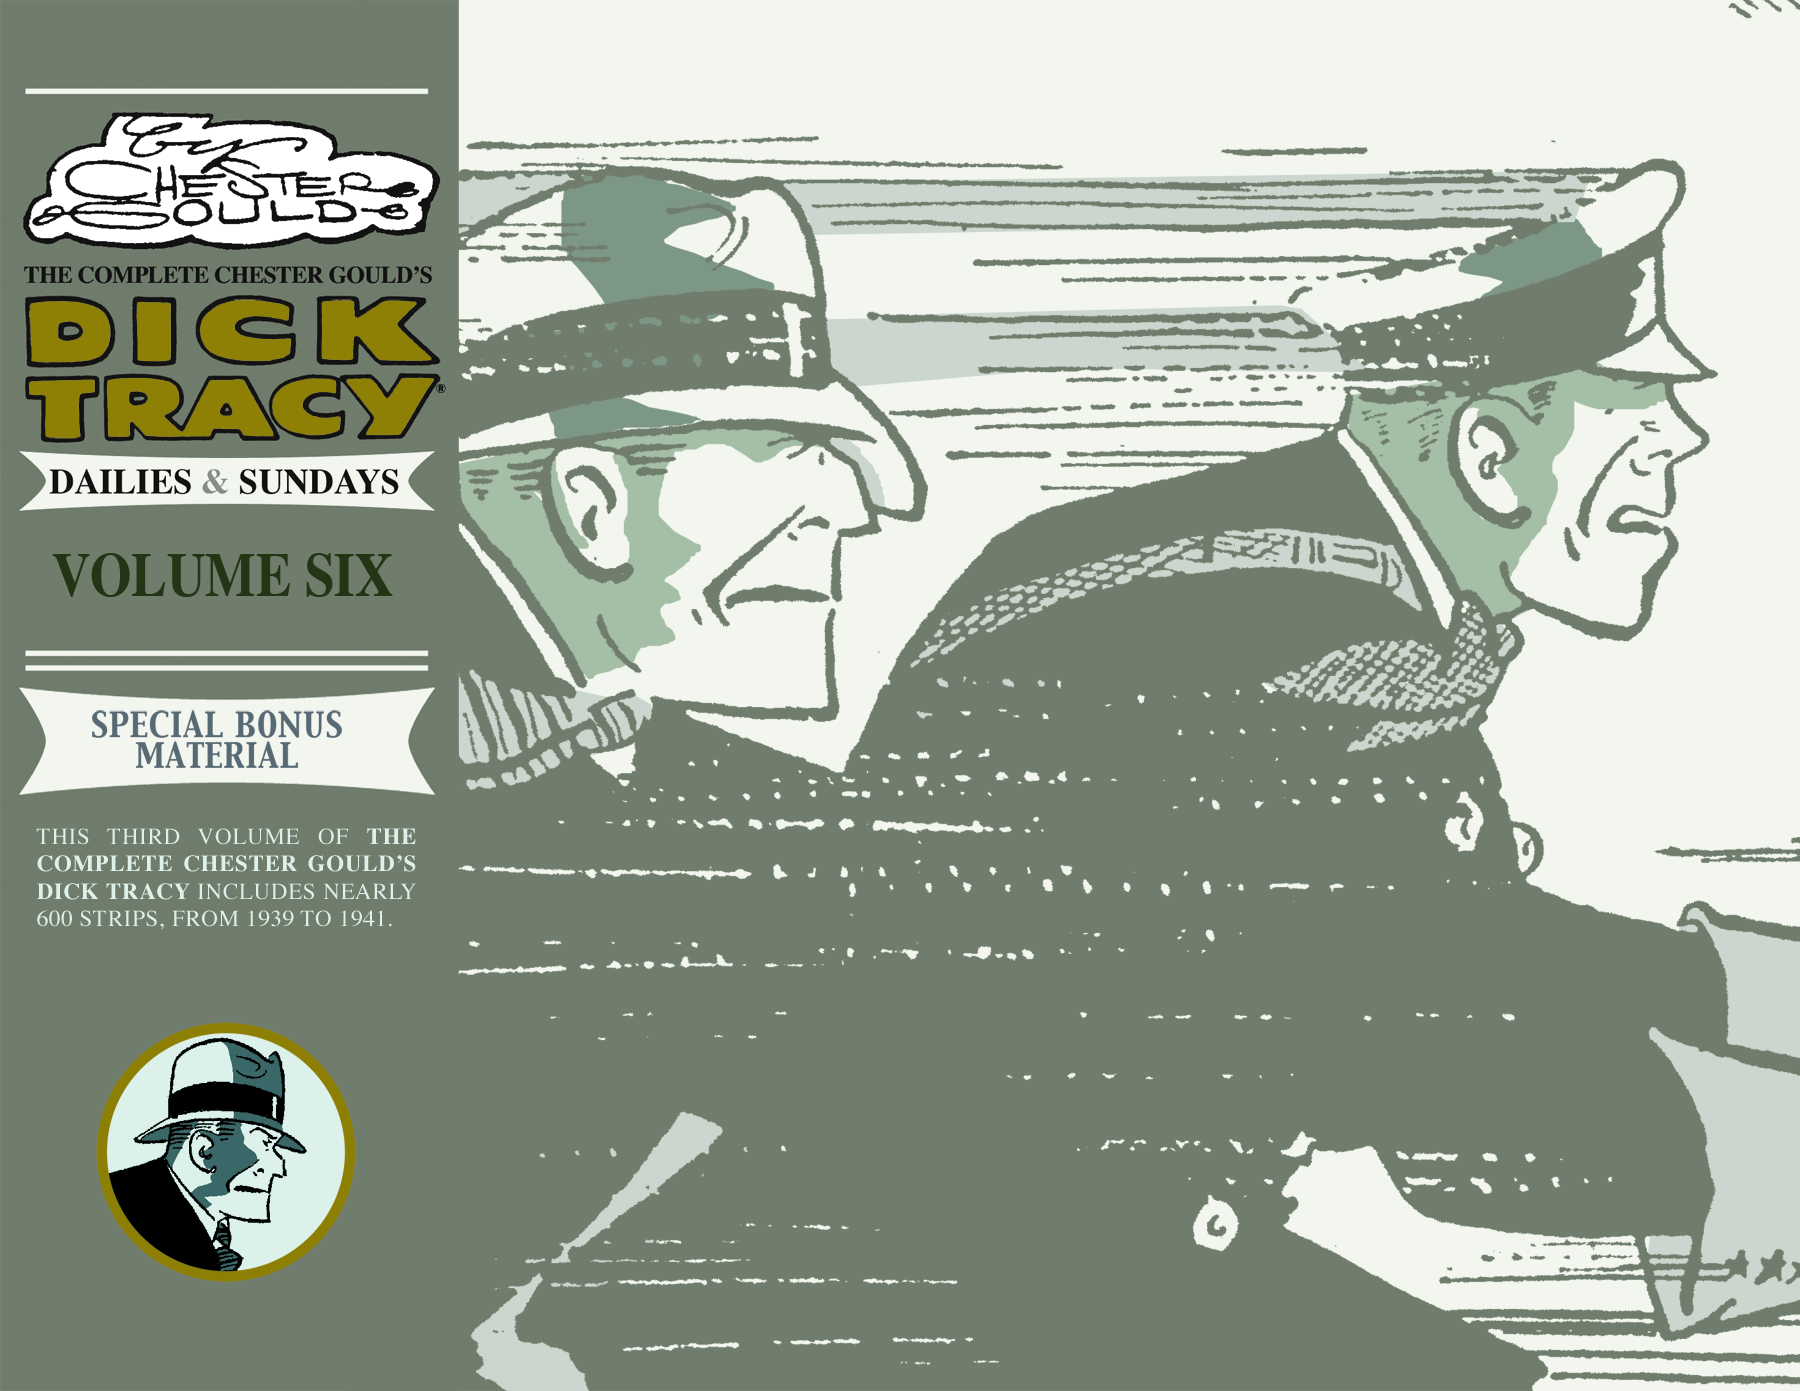 COMPLETE CHESTER GOULD DICK TRACY HC VOL 06